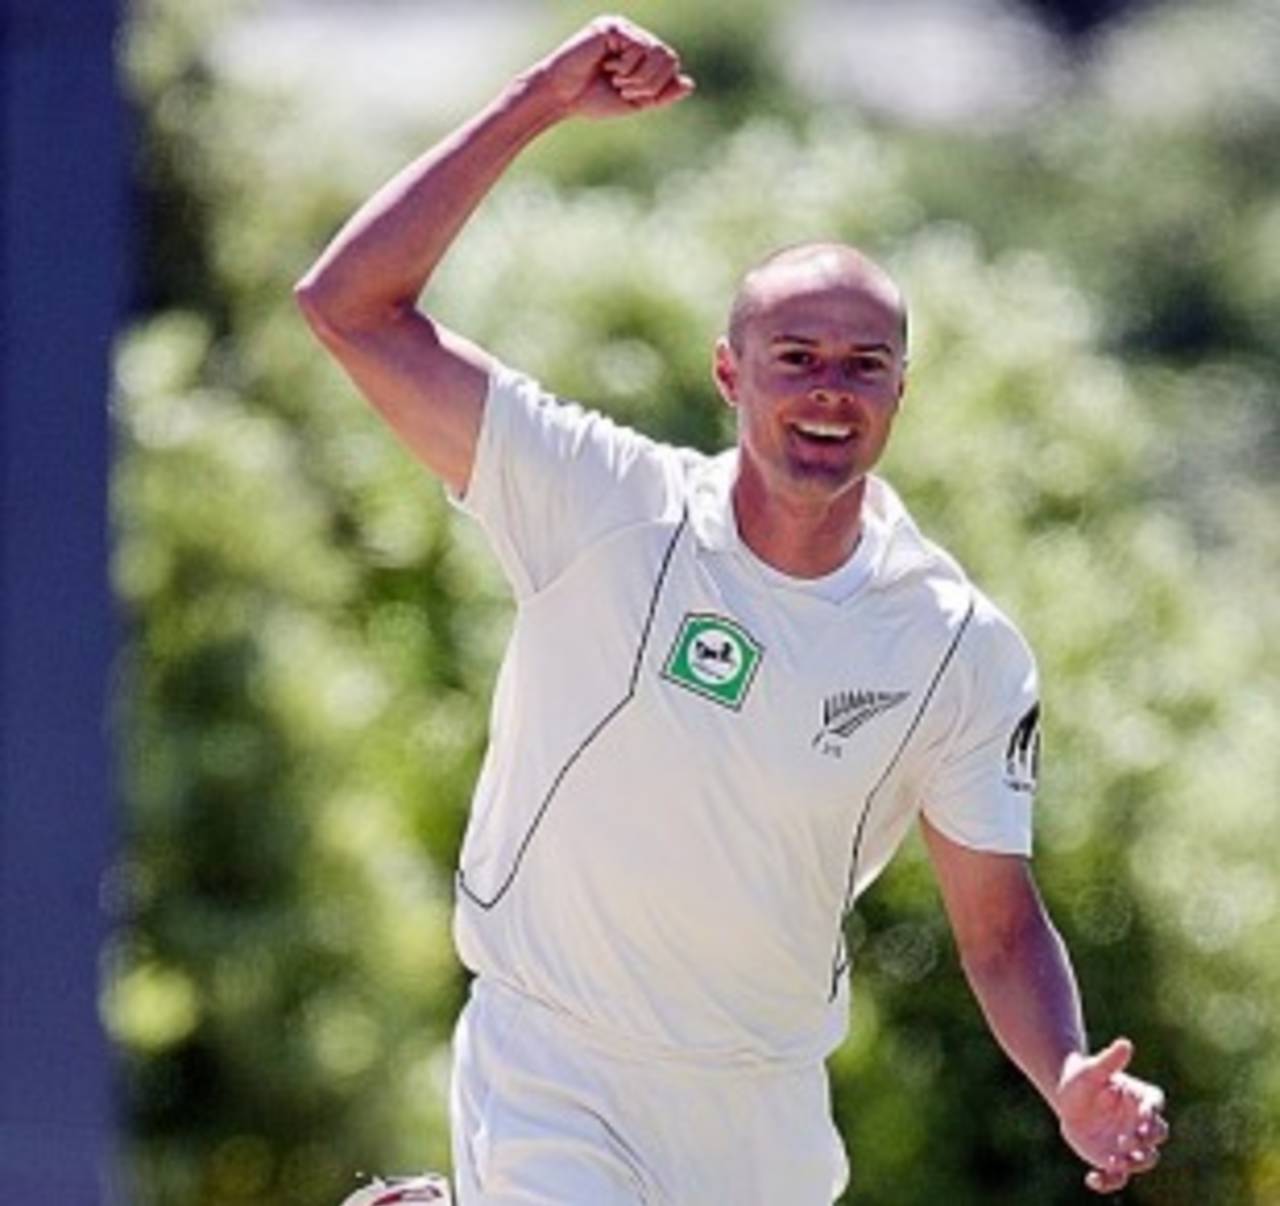 Chris Martin pegged back Pakistan with two early wickets, New Zealand v Pakistan, 1st Test, Dunedin, 3rd day, November 26, 2009